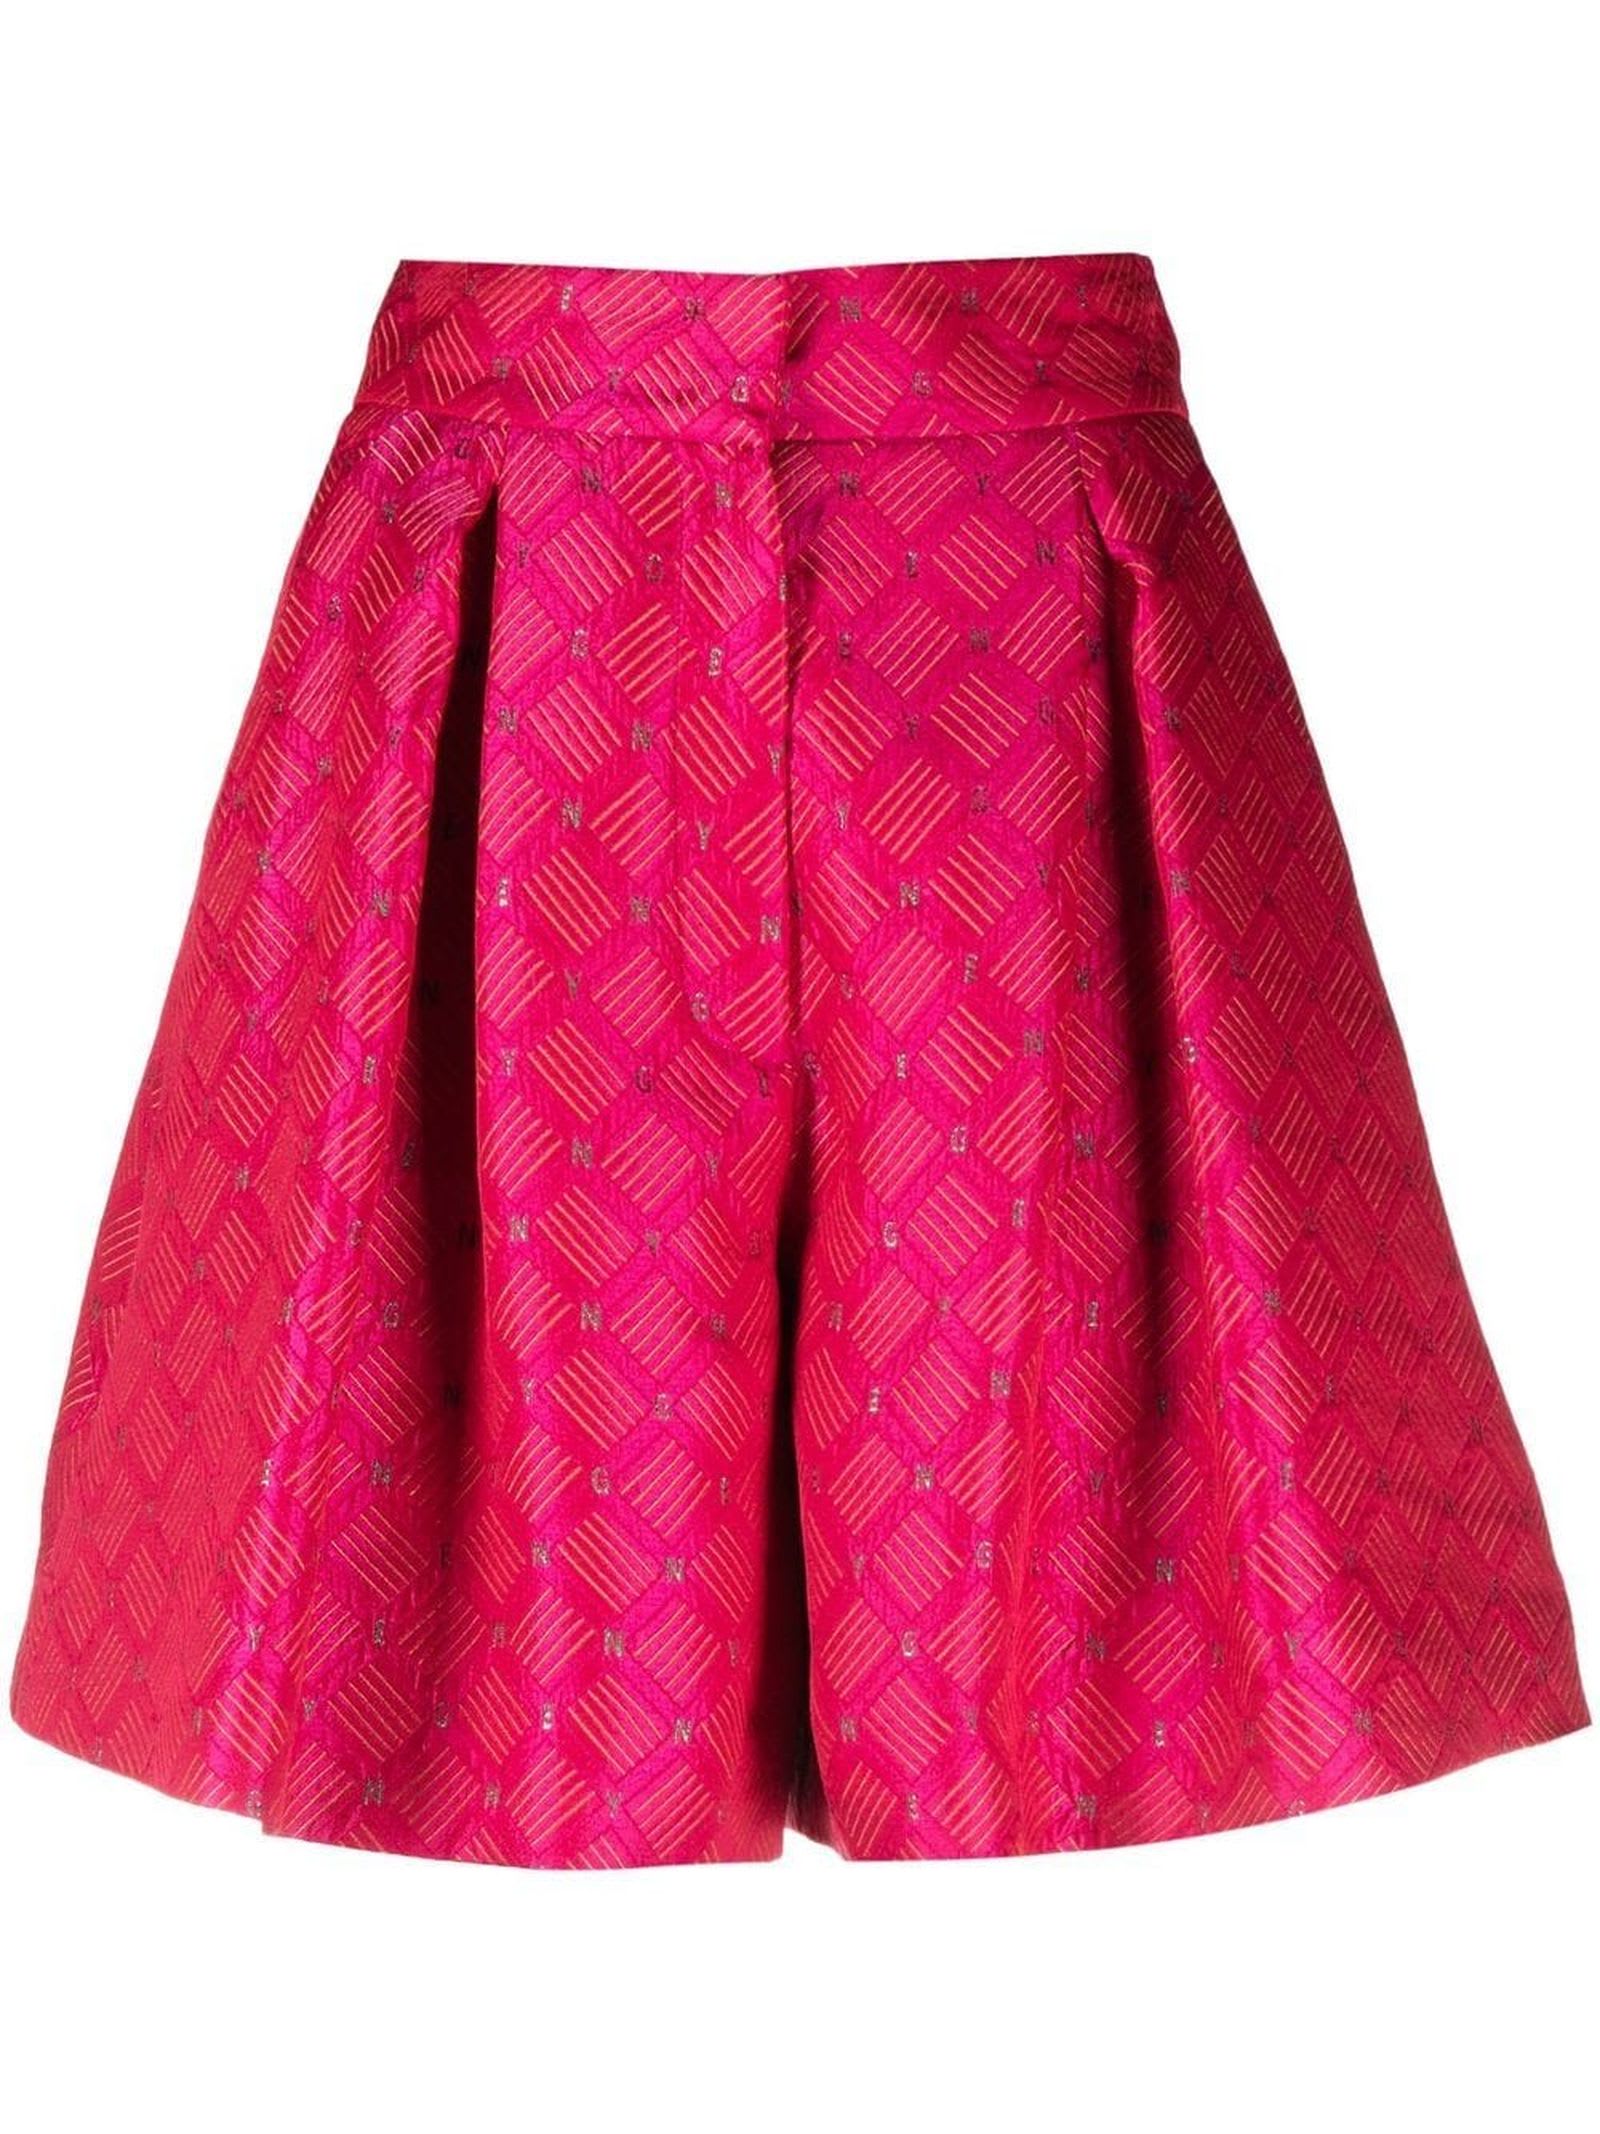 GENNY JACQUARD TAILORED SHORTS